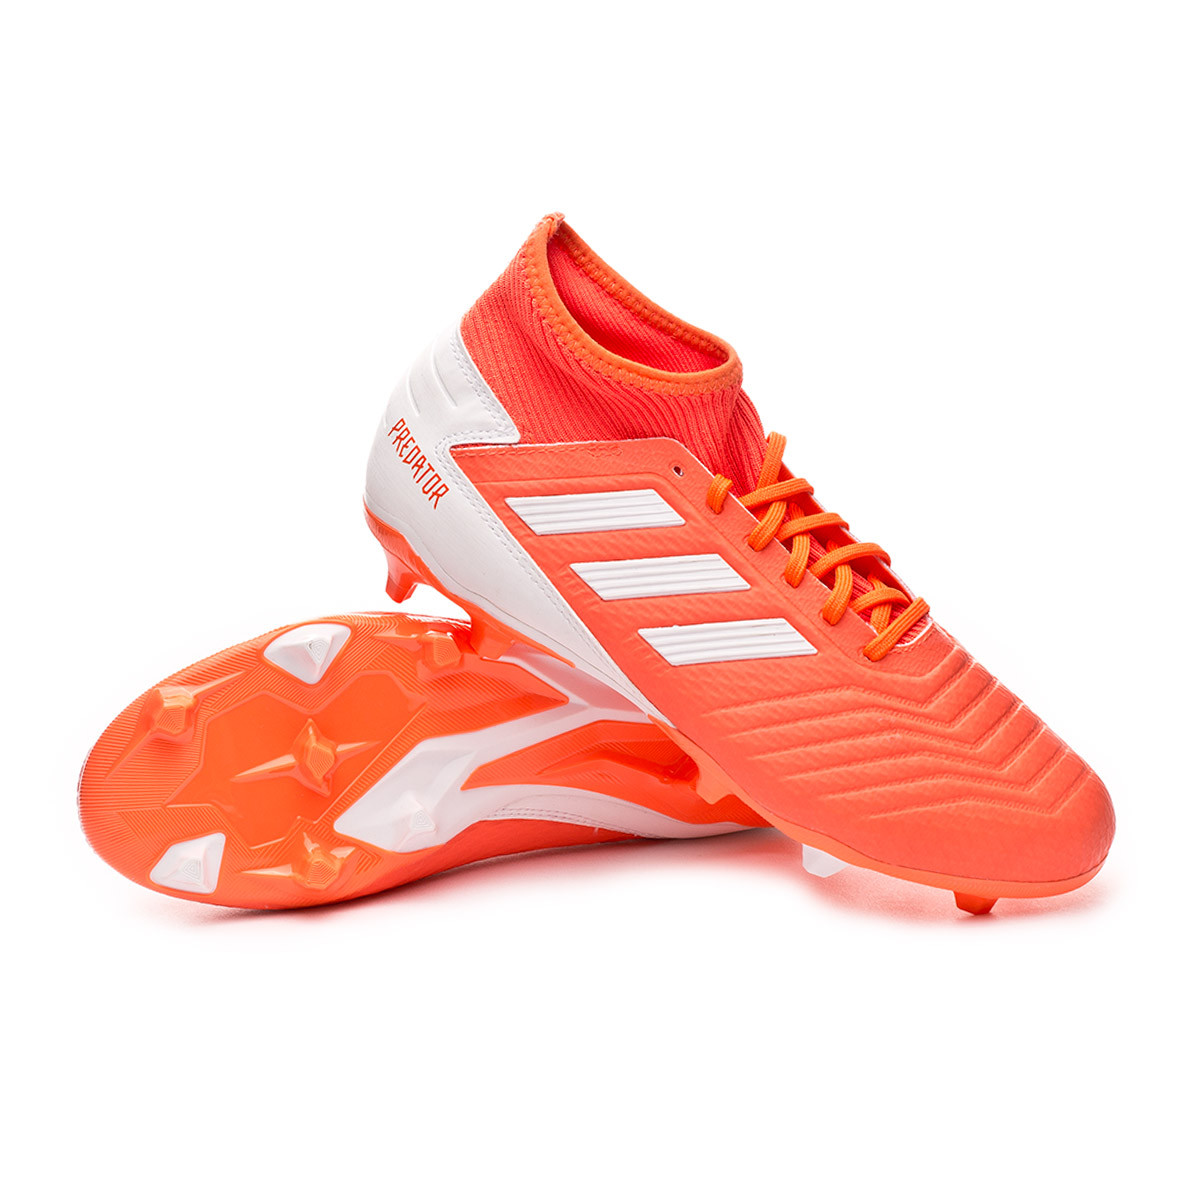 predator youth soccer cleats